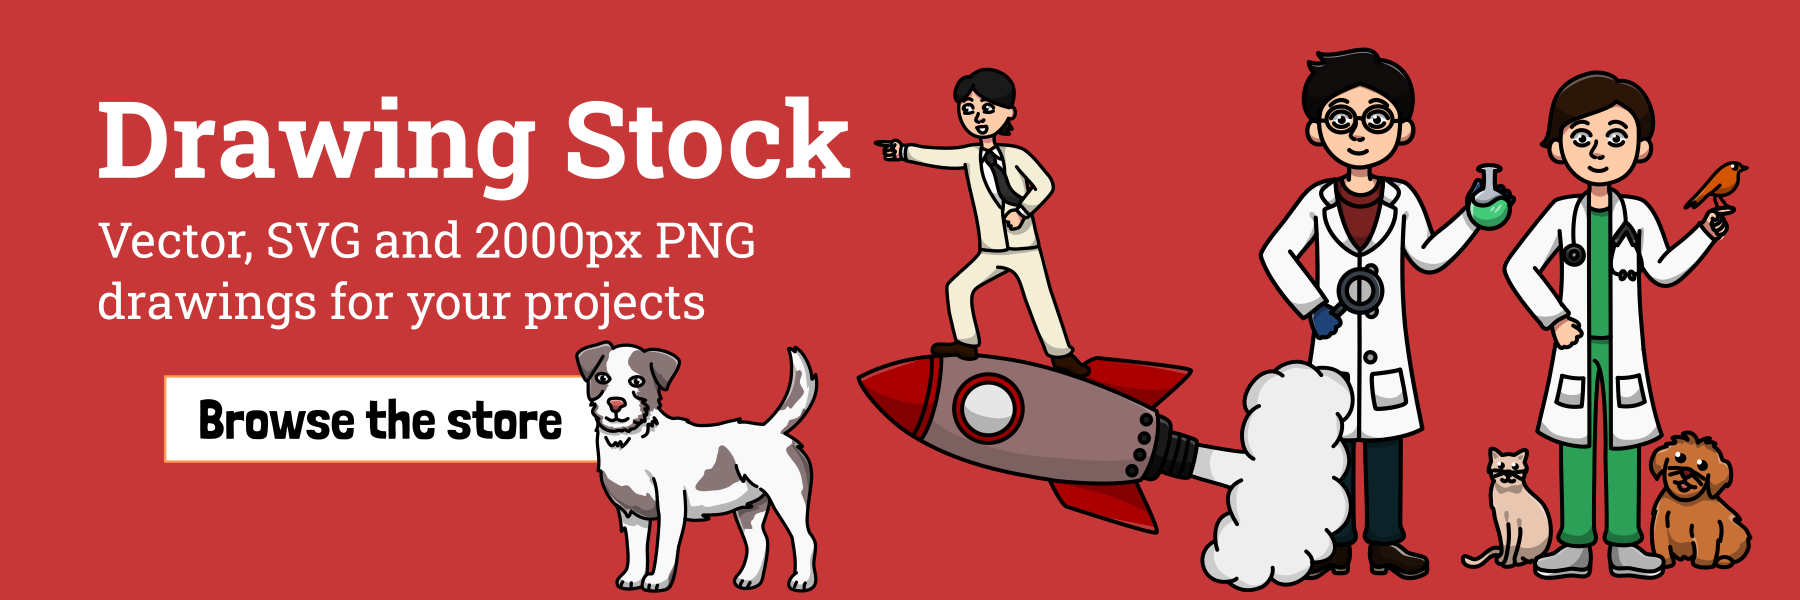 drawingstock svg images